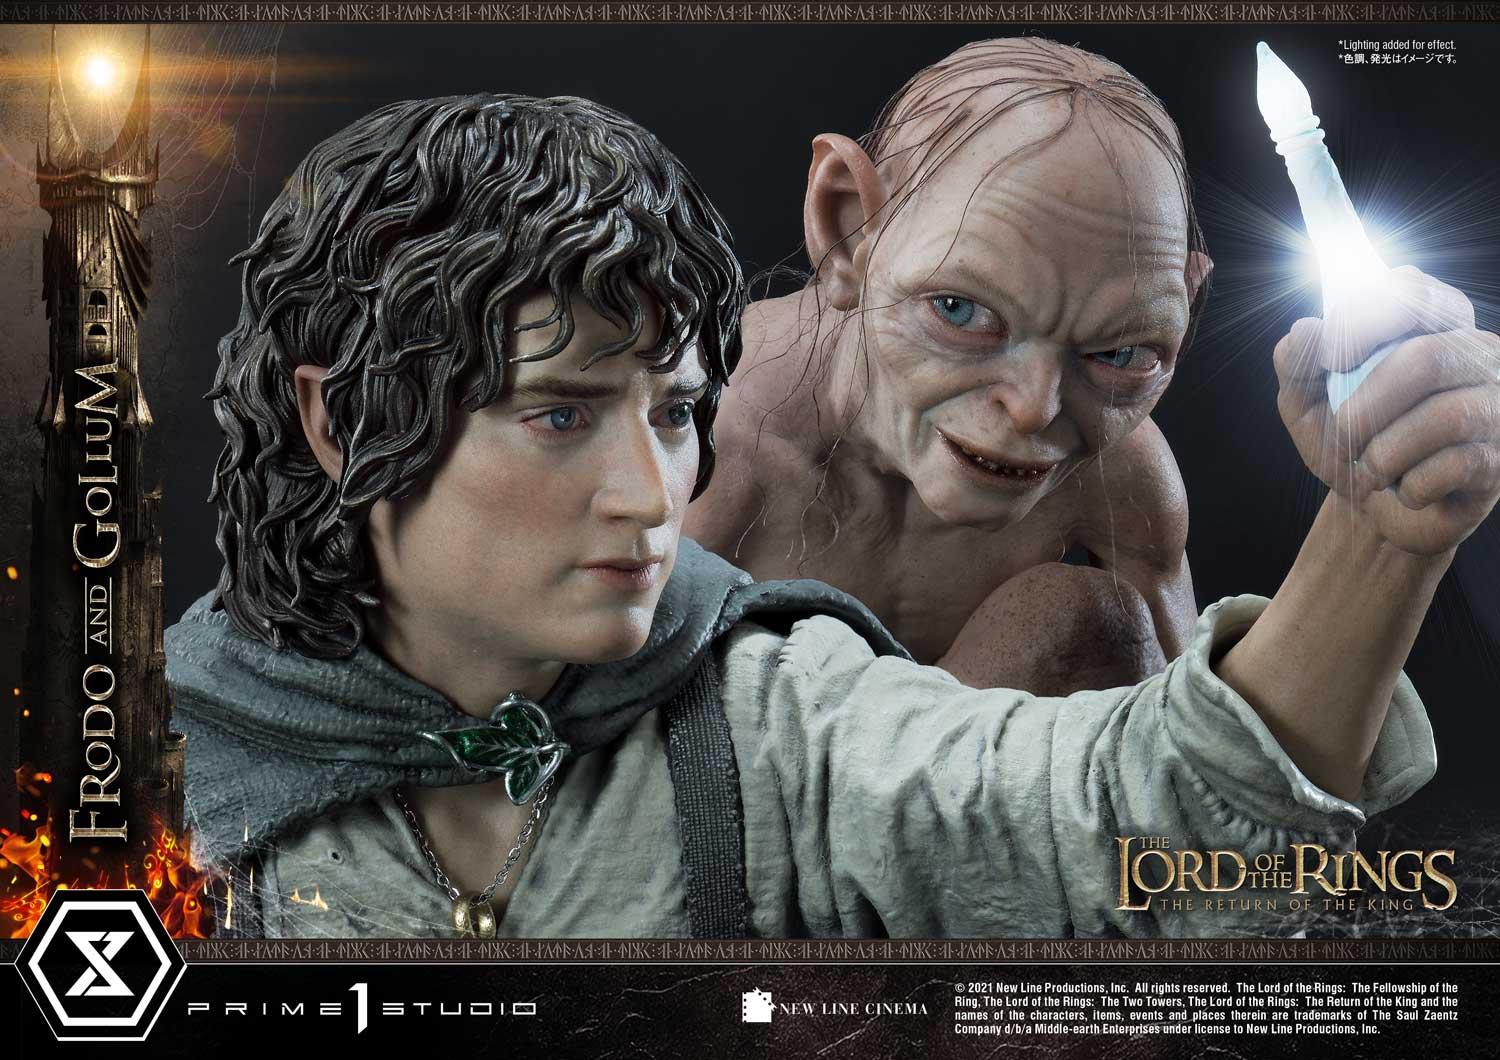 Frodo and Gollum fight over the One - Winter-Is-Coming.net